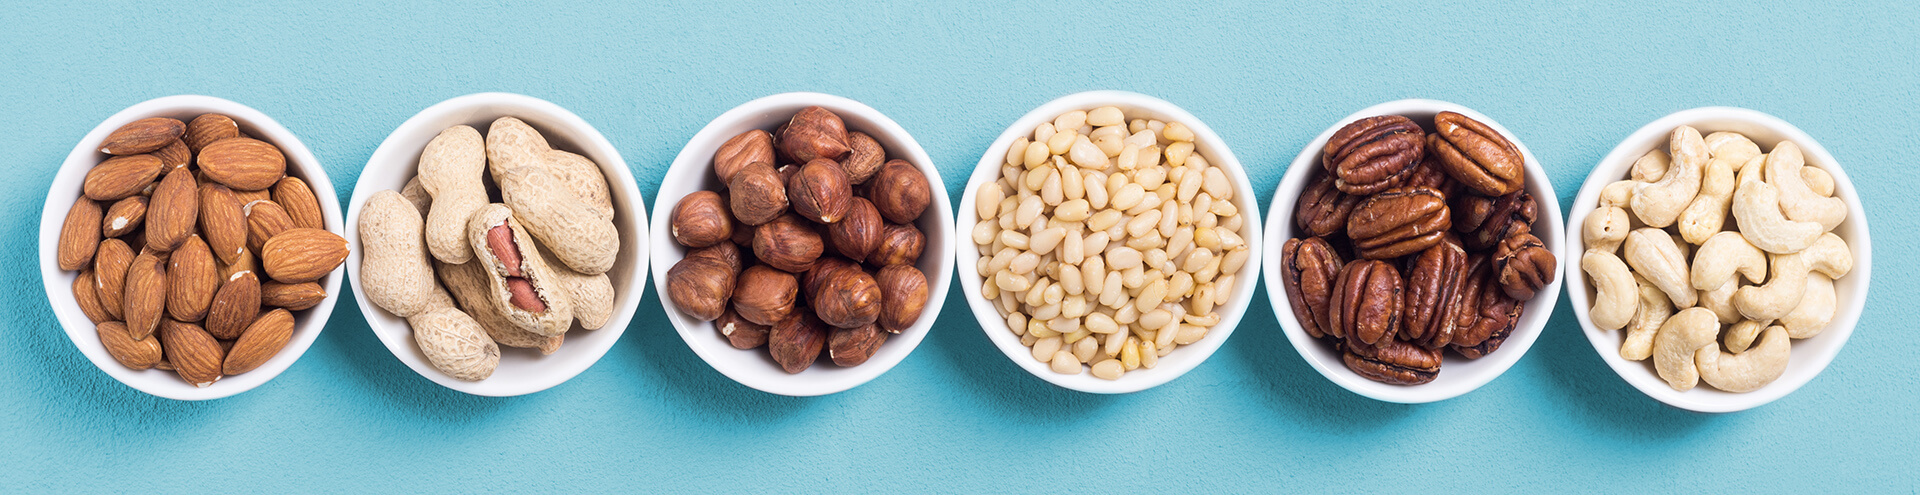 Mixed nuts in small white bowls against a blue background